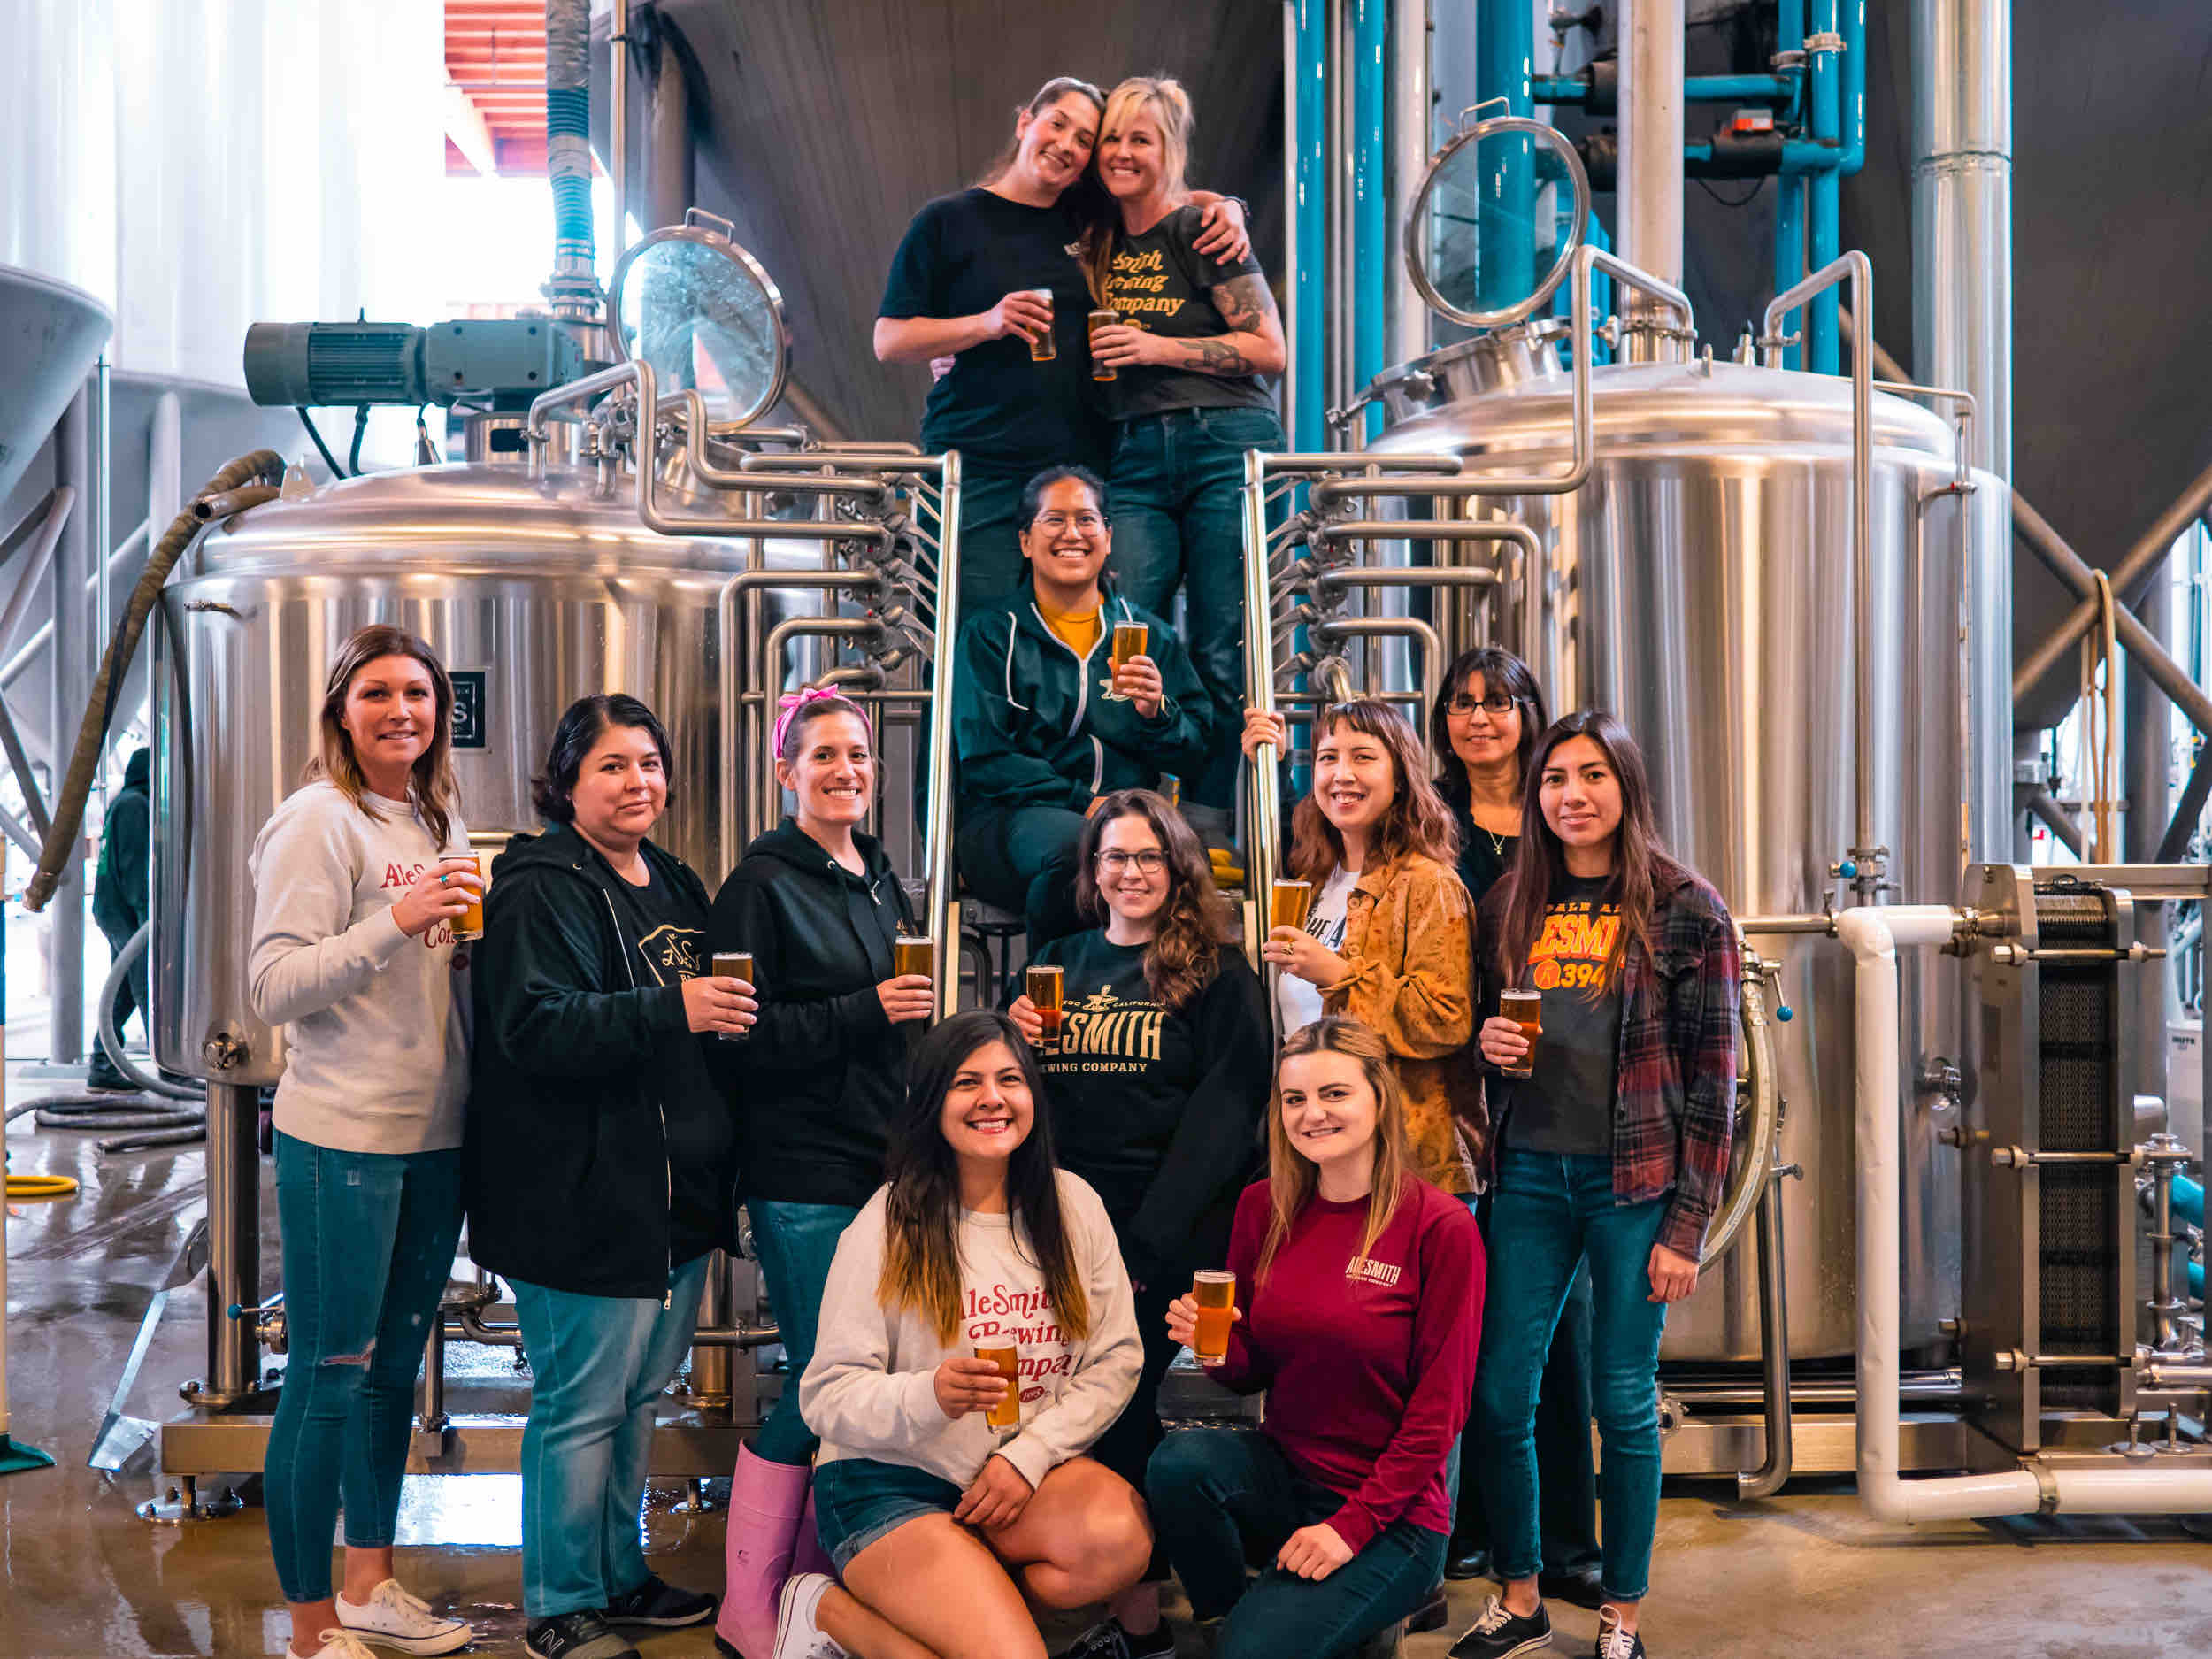 Women's brew day for Fearless IPA. (image courtesy of AleSmith Brewing Co.)